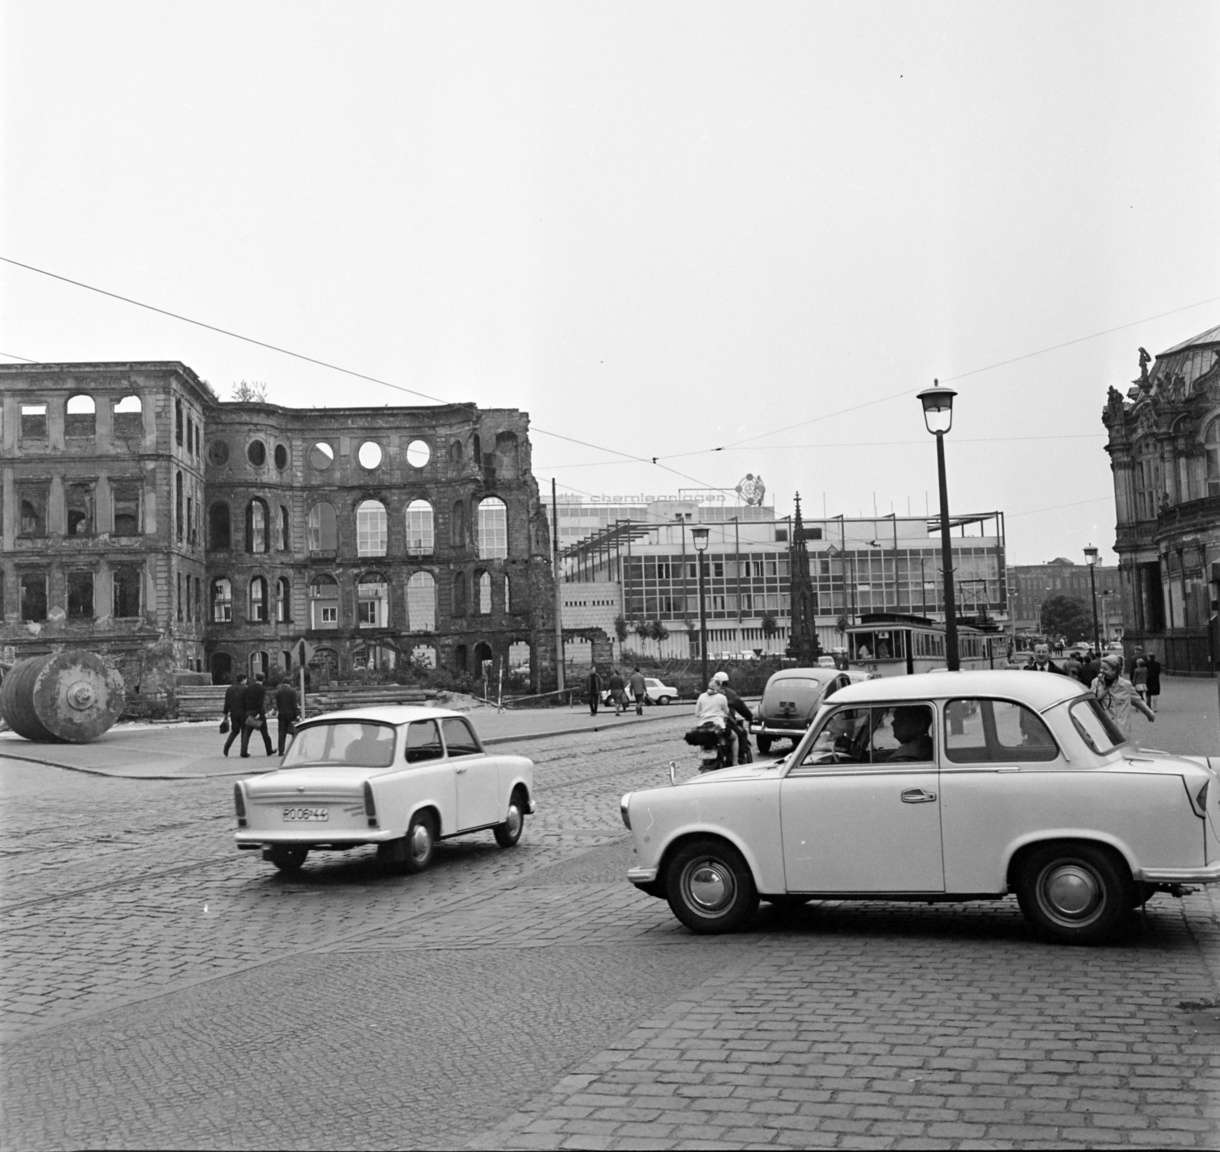 The state of the GDR during the sixties could not be better be expressed in a single picture: the scars of war are still in the background, but two generations of Trabants are already smoking up the streets. You can see an early model on the left, but the one on the right is the 601 which became the car of the masses in Hungary as well. The car made by the country suffering from problems of raw material supply was already obsolete as it was being designed, but it was well-loved by many as it was cheap and easy to repair. 
                        